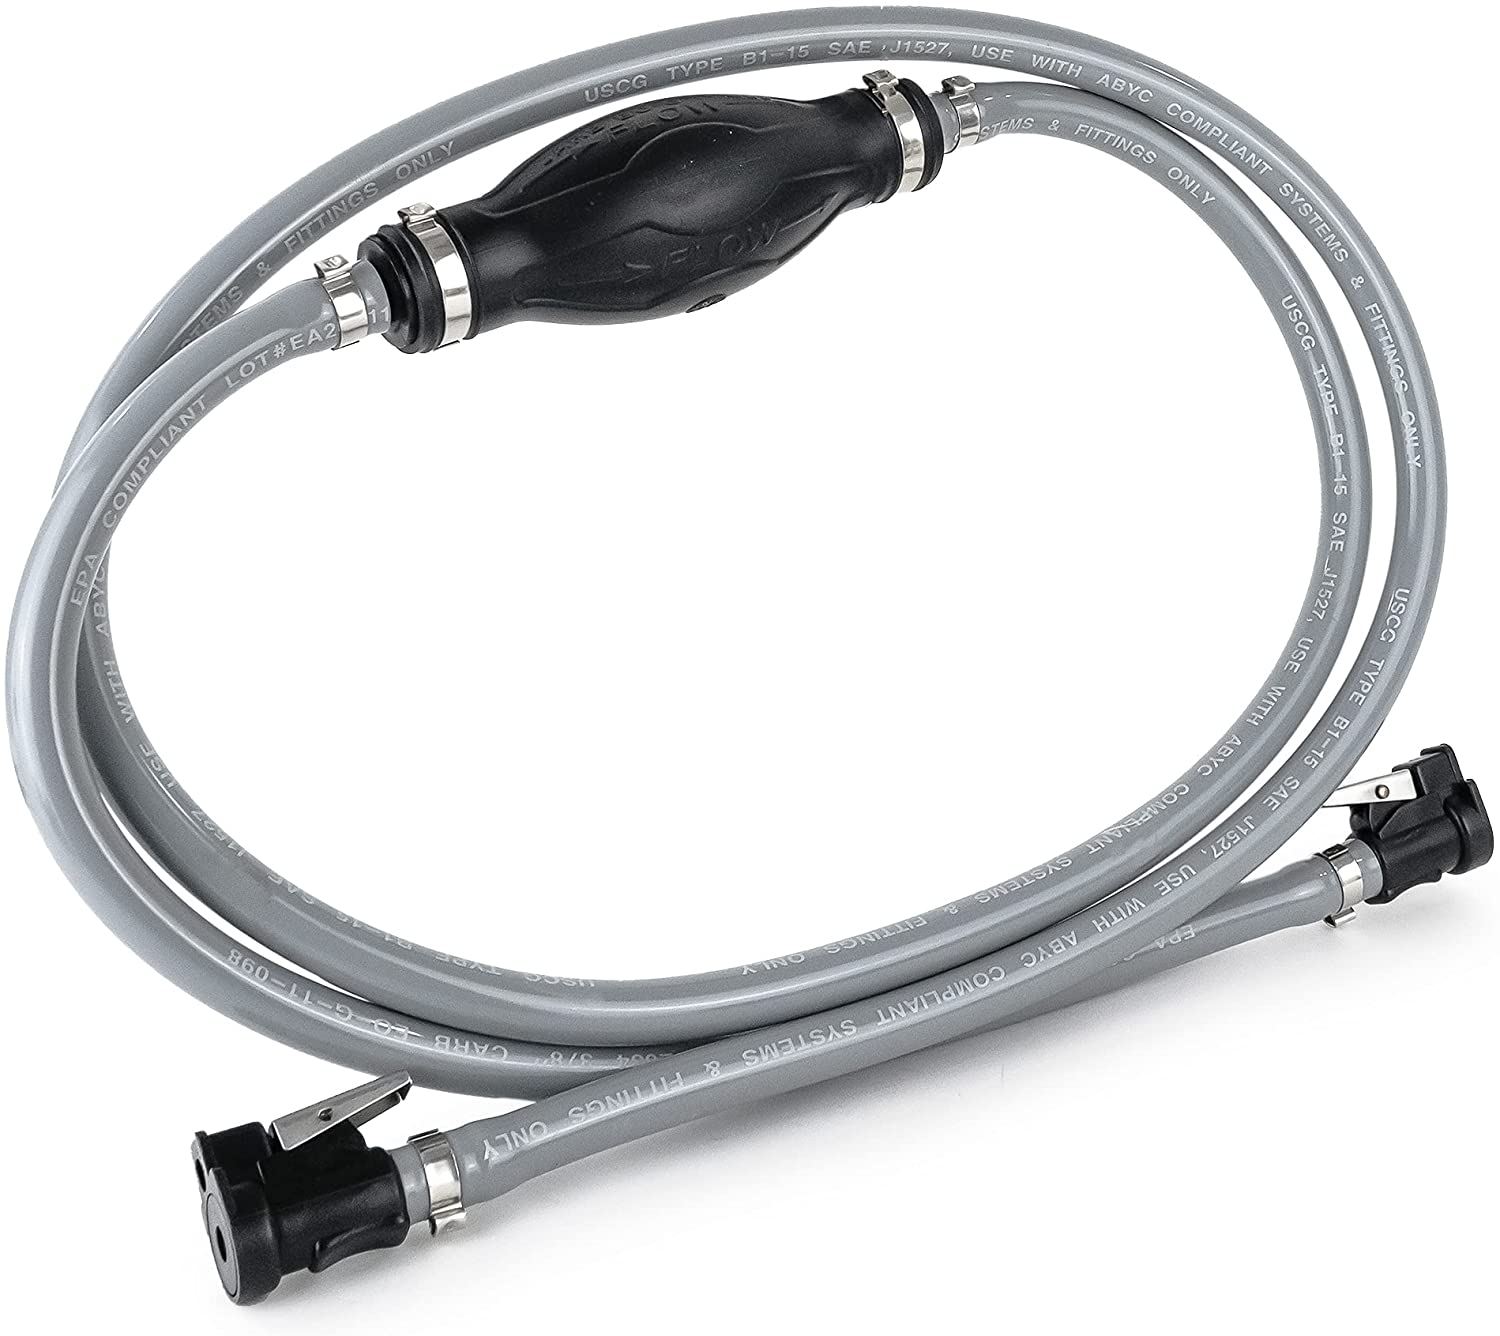 Reinforced EPA/CARB Fuel Line with Primer Bulb for OMC, Johnson